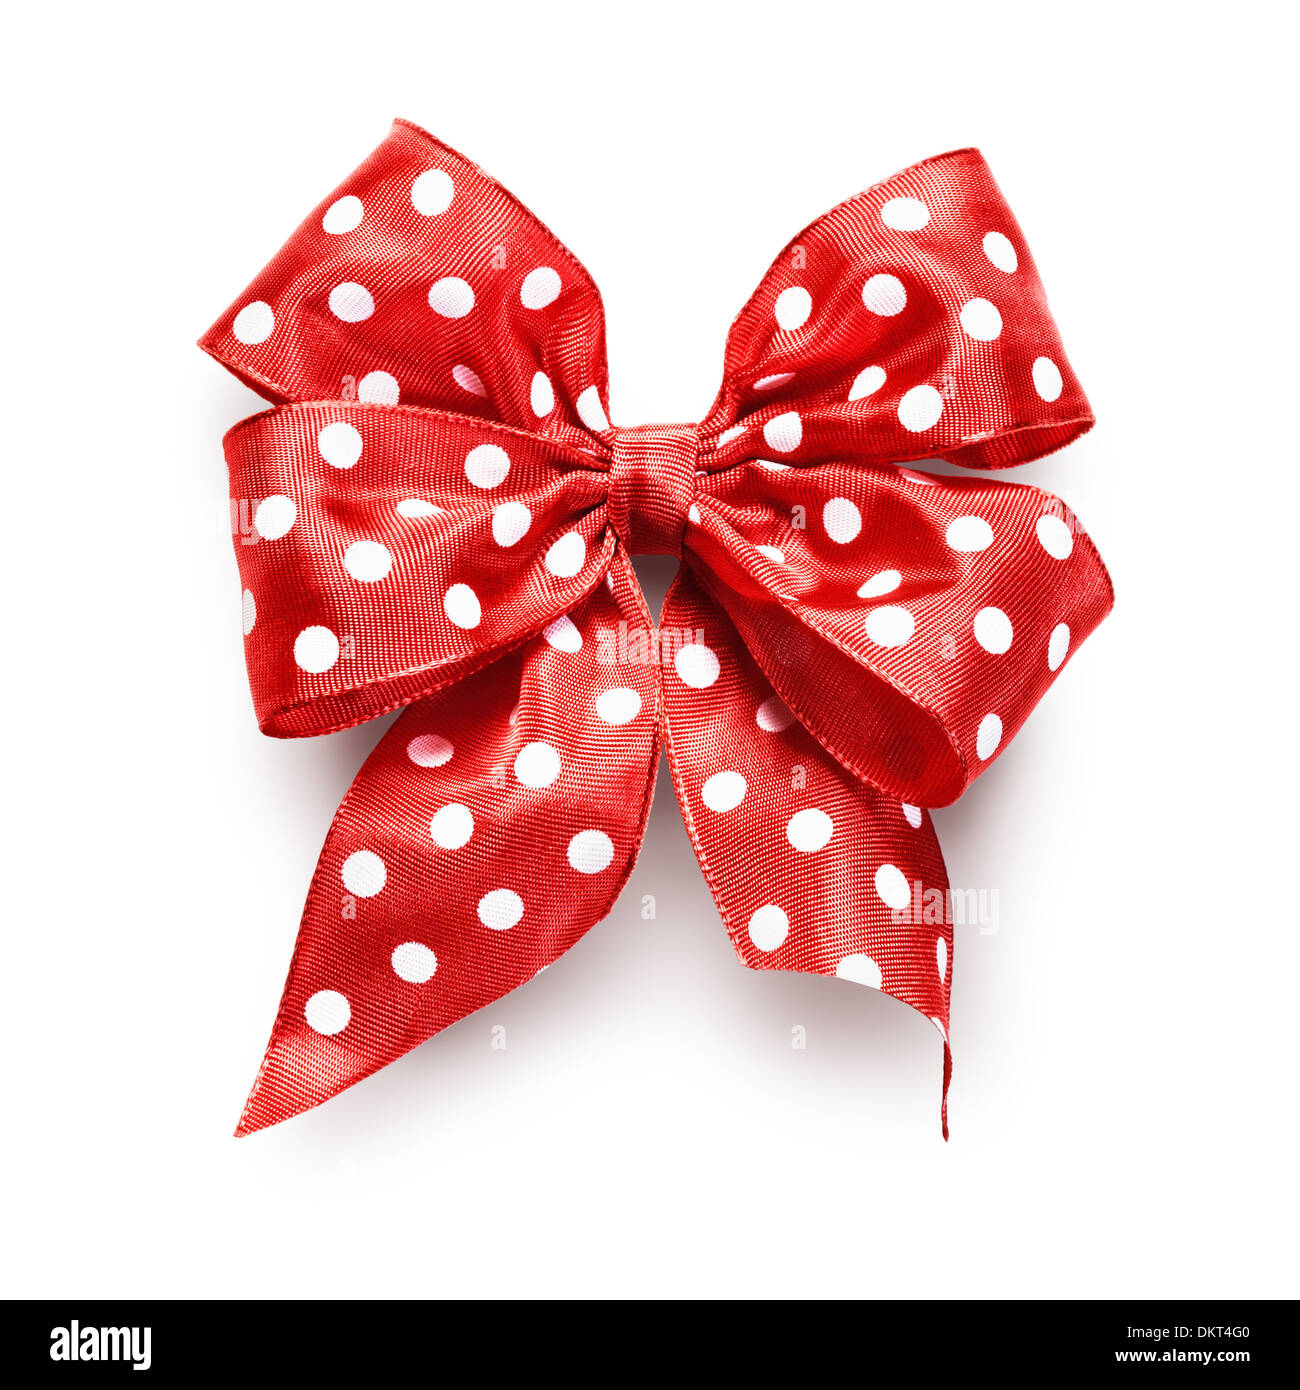 Polka dot red ribbon bow isolated on white background clipping path included Stock Photo